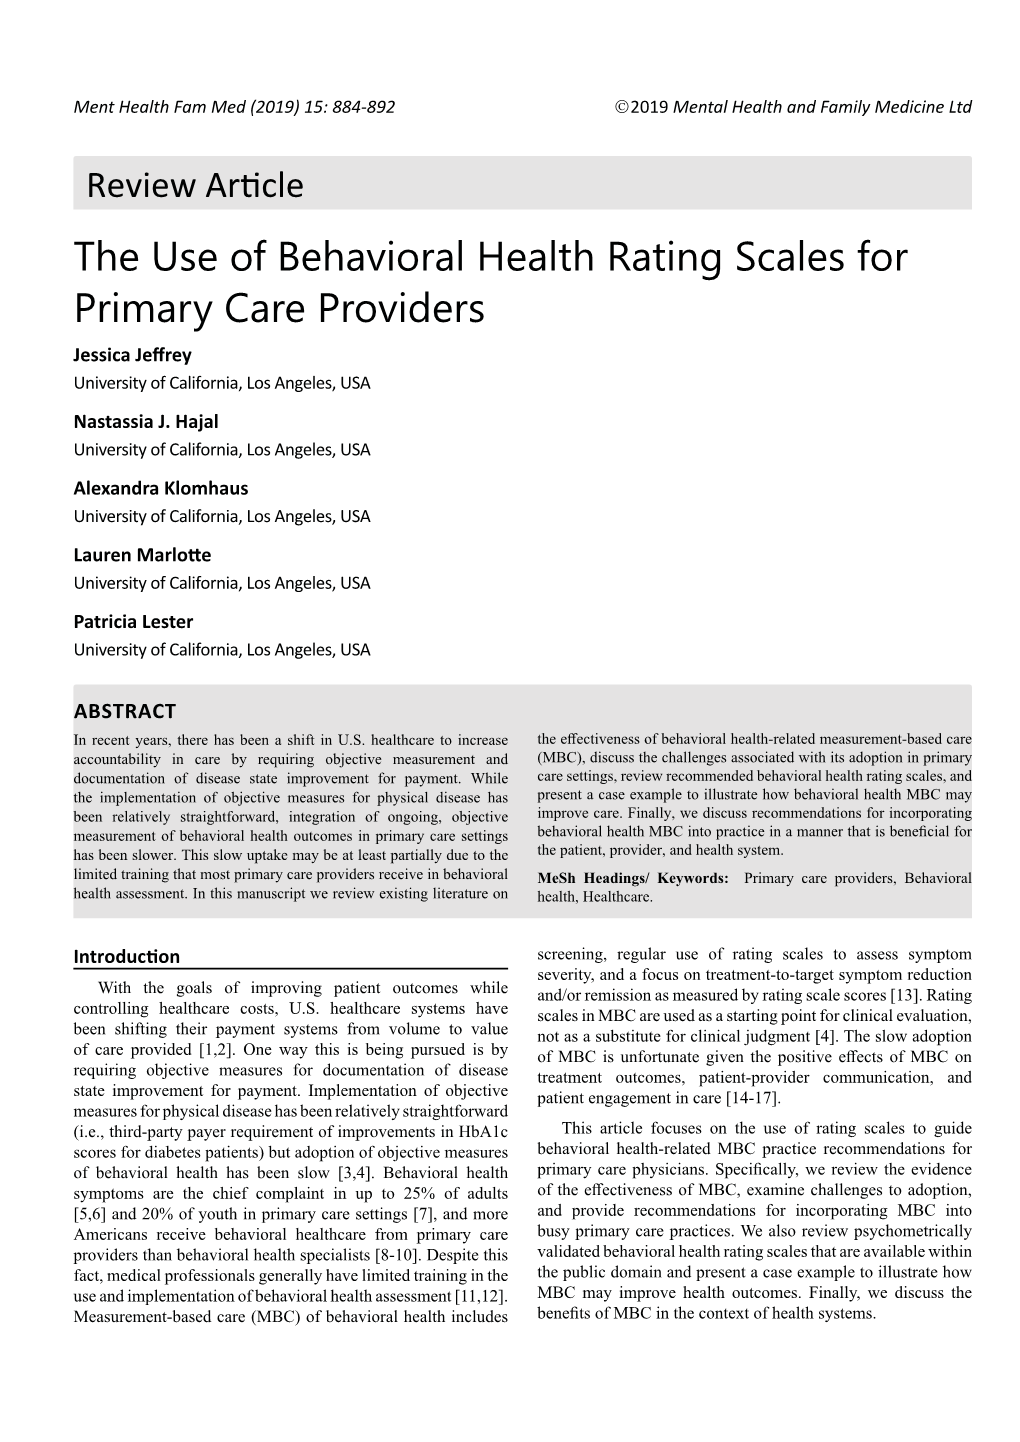 The Use of Behavioral Health Rating Scales for Primary Care Providers Jessica Jeffrey University of California, Los Angeles, USA Nastassia J